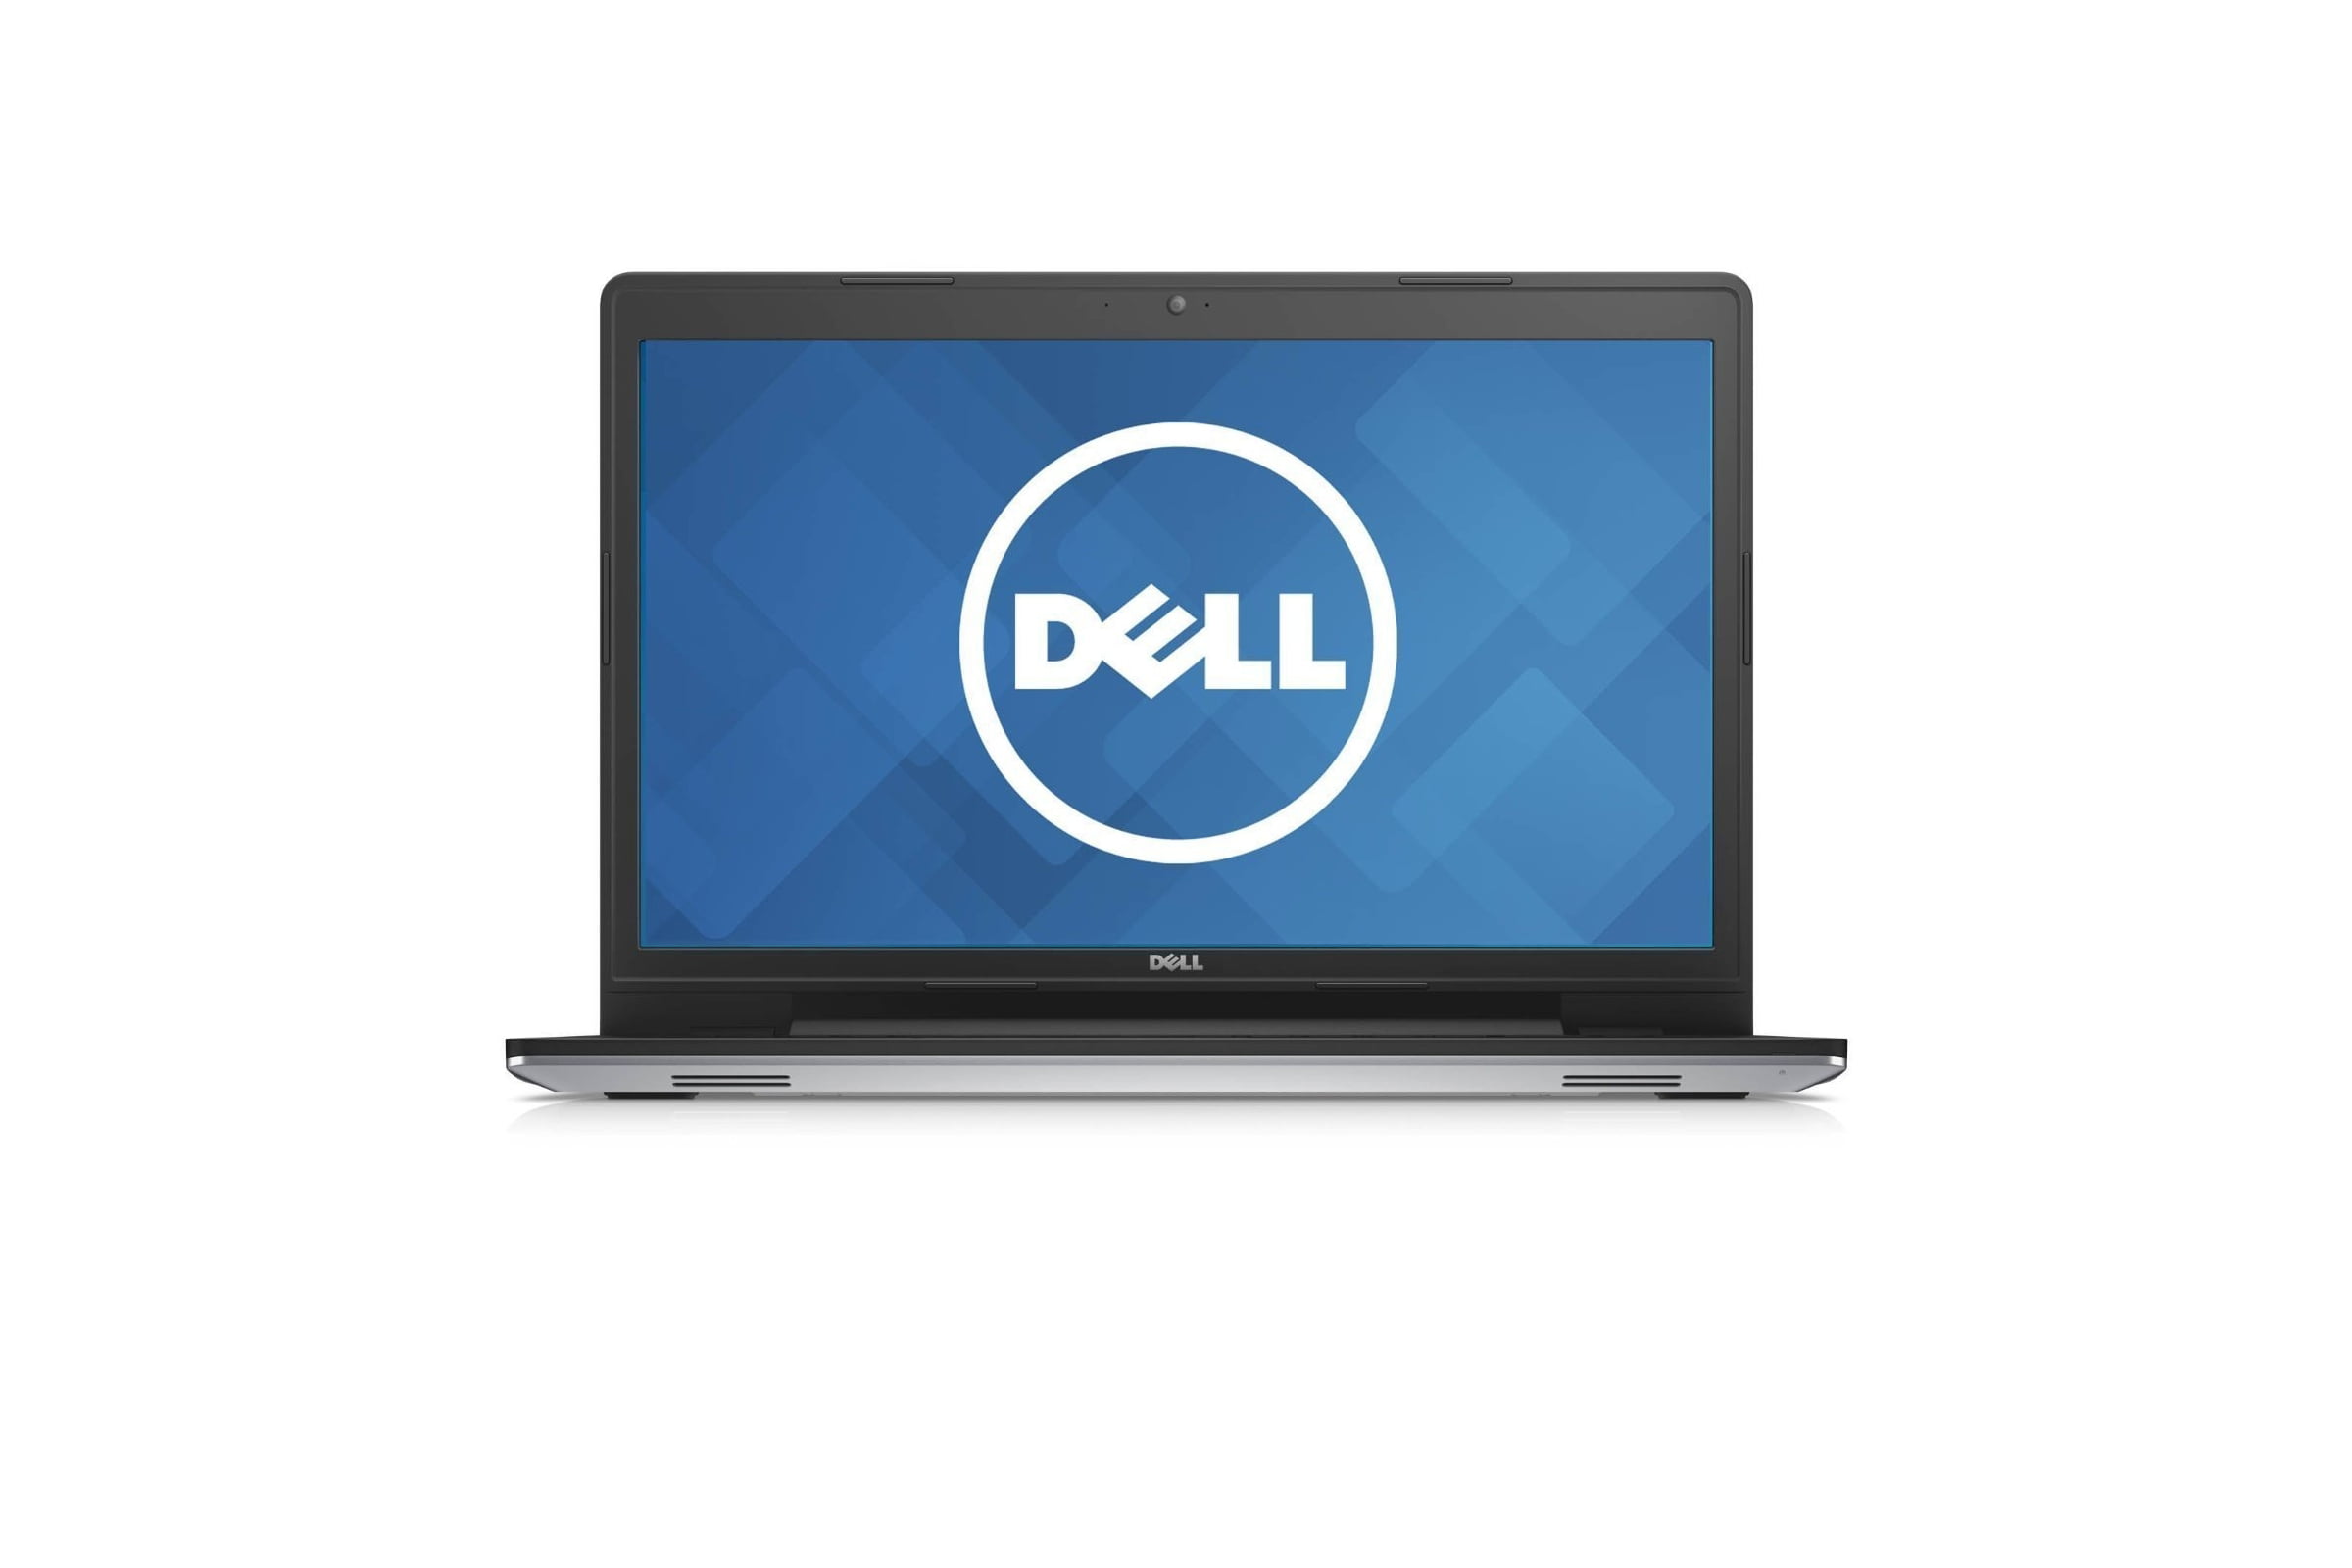 DELL INSPIRON 64000 DRIVERS FOR WINDOWS 7